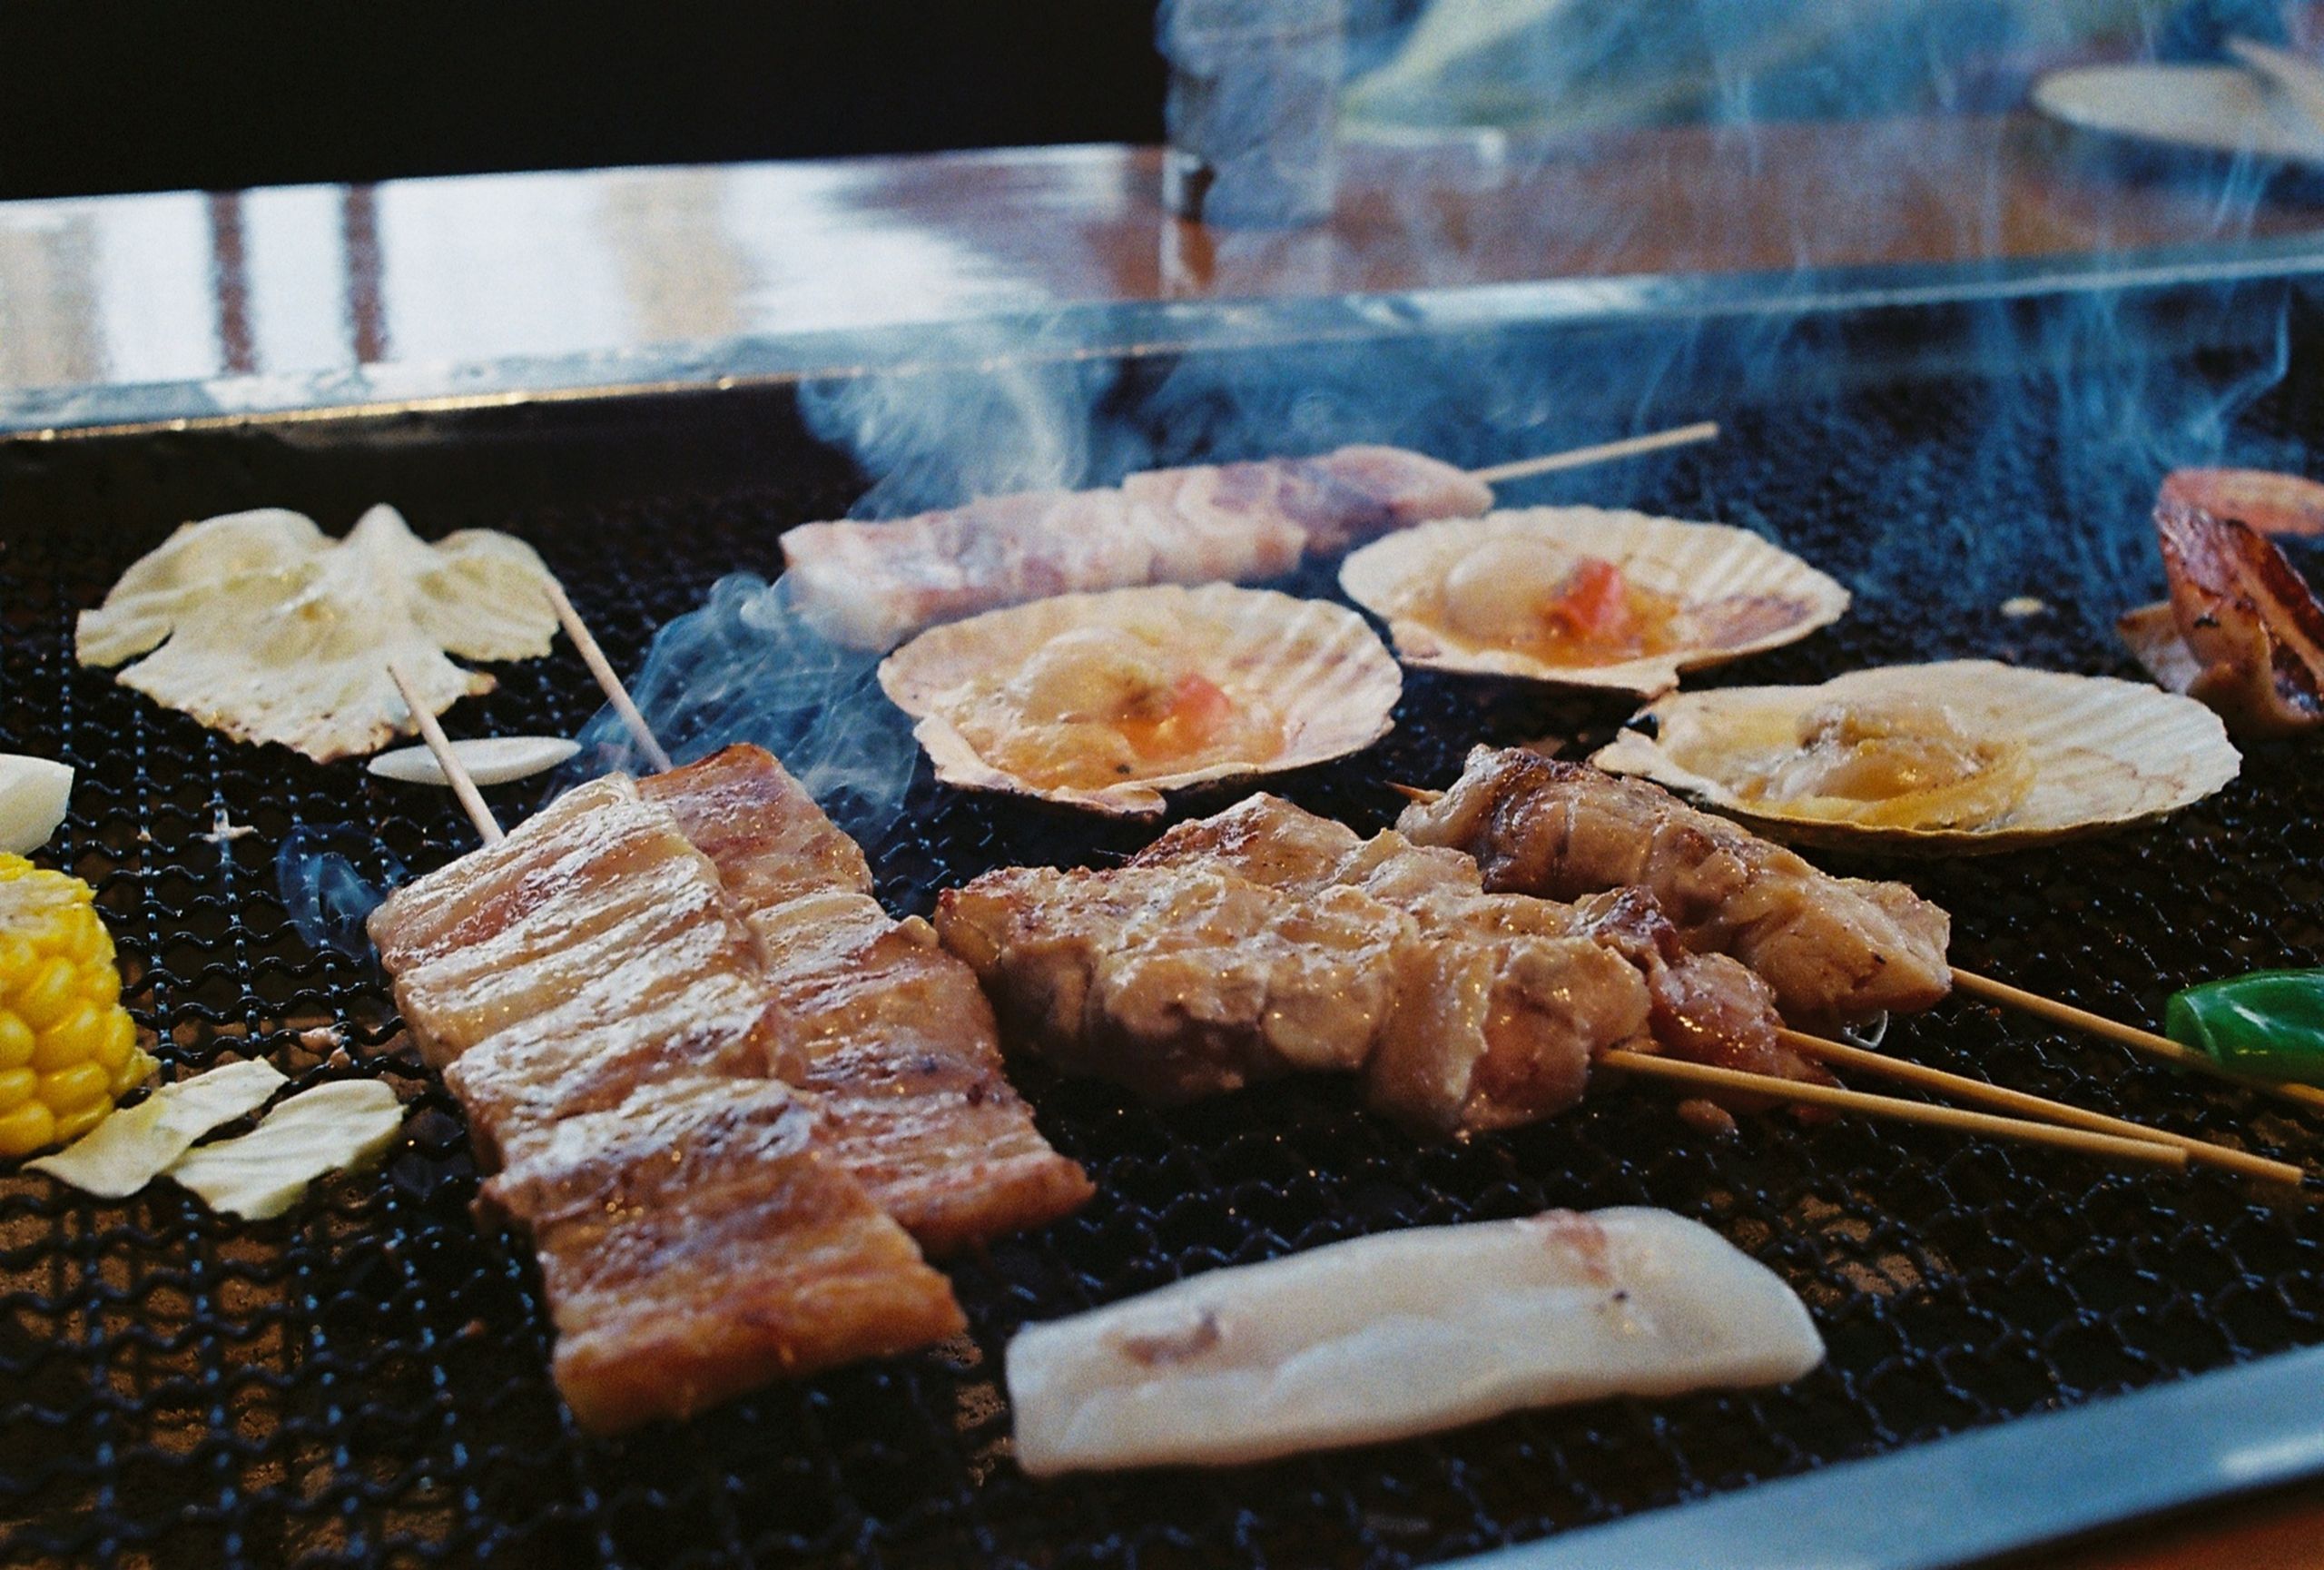 Japanese grill food